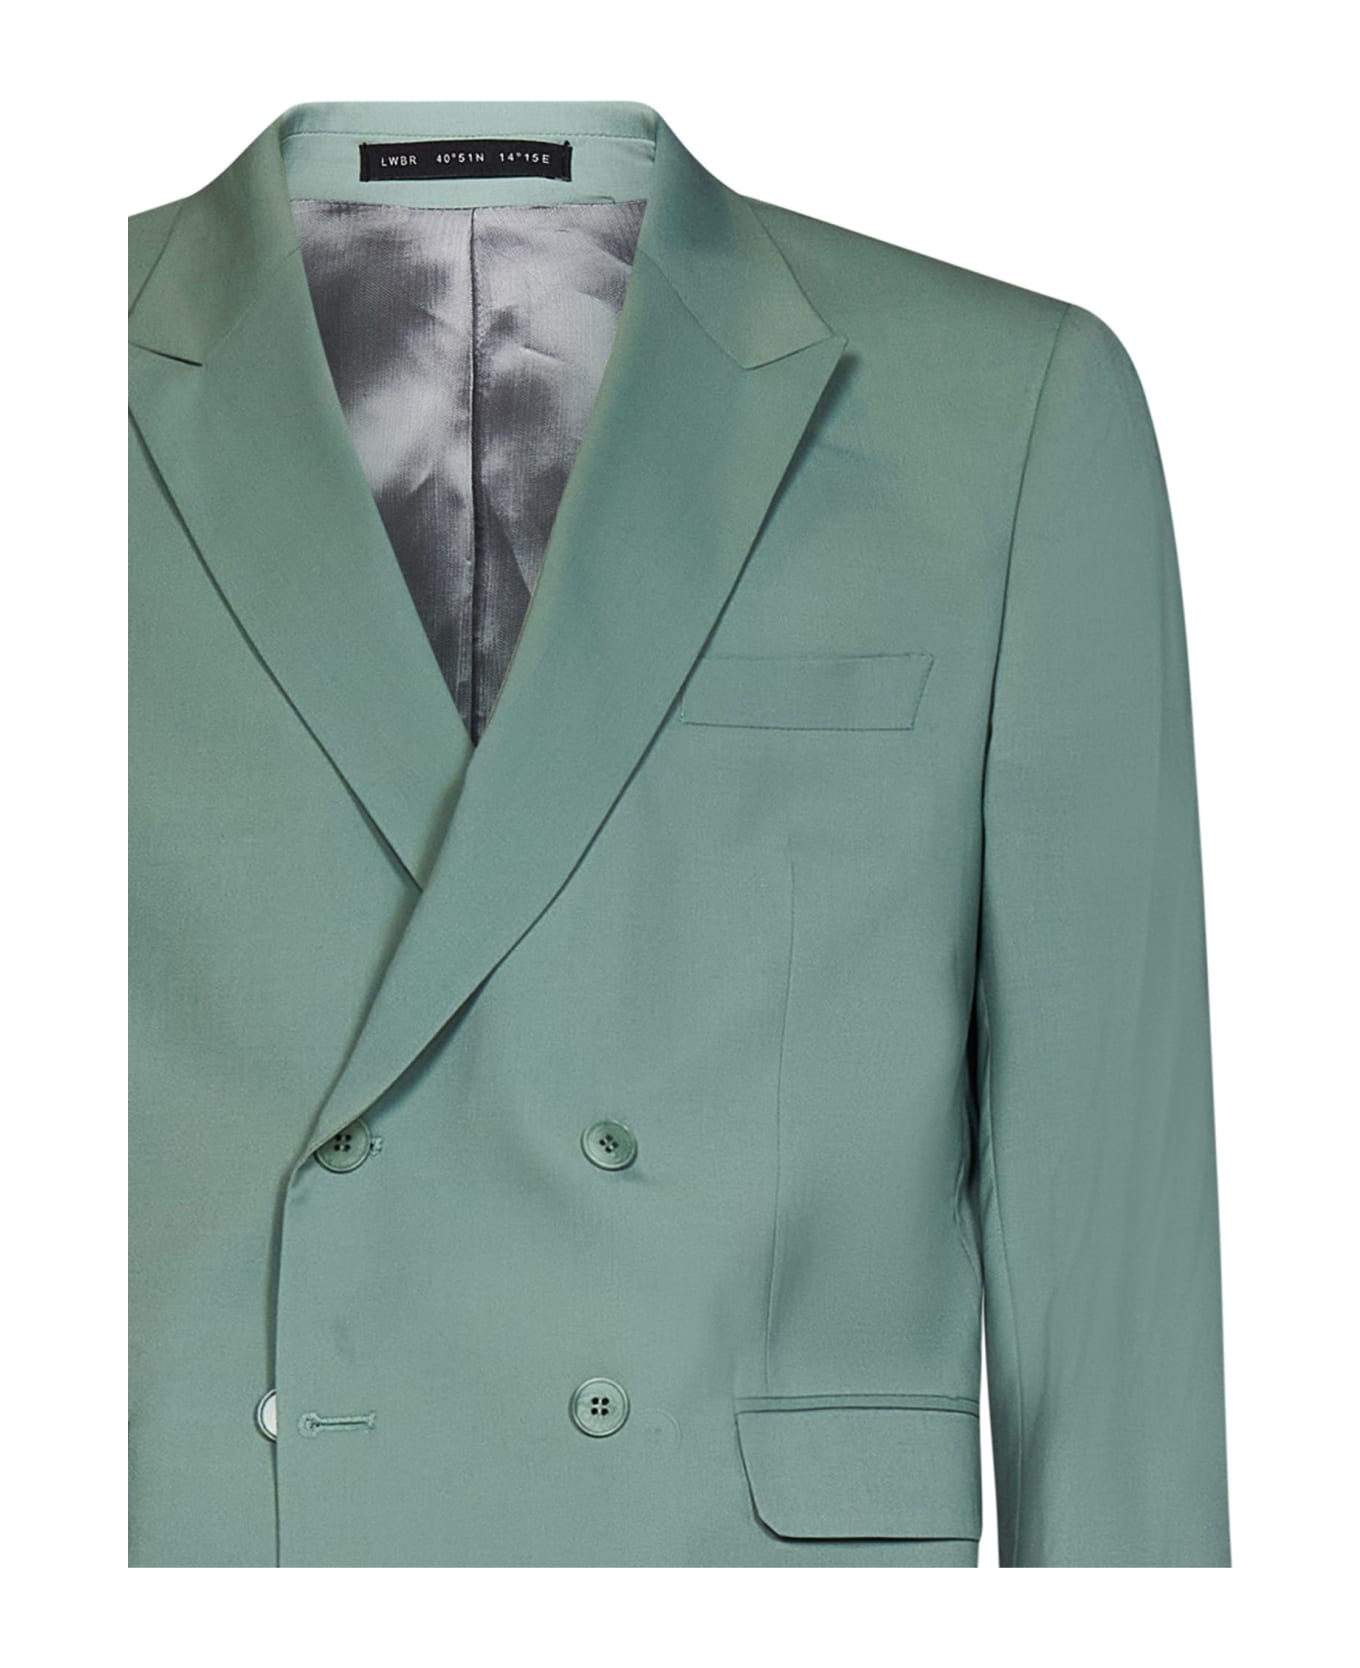 Low Brand Suit - Green